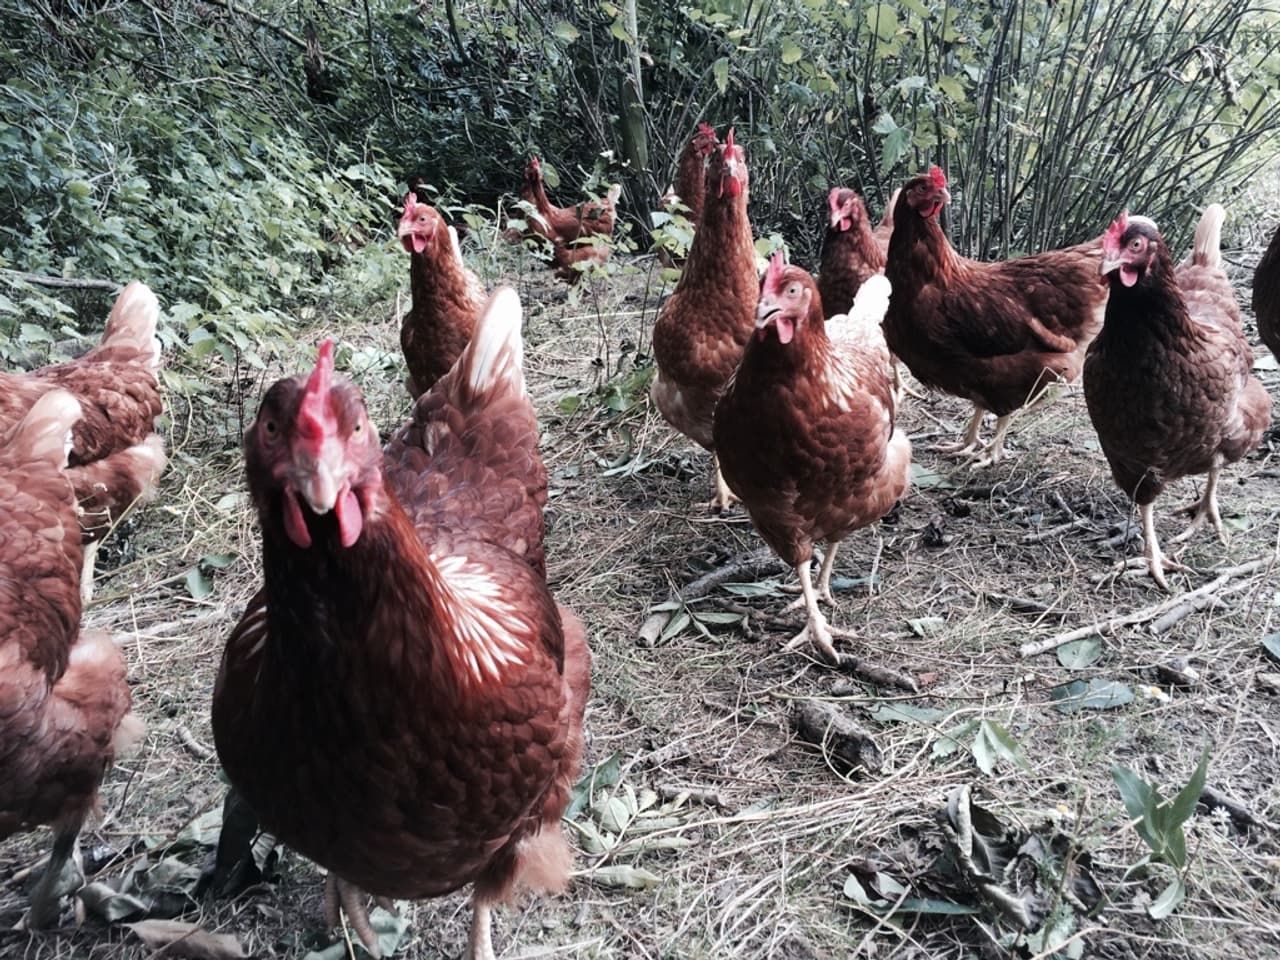 Free range chickens stand on a batch of ground next to bushes